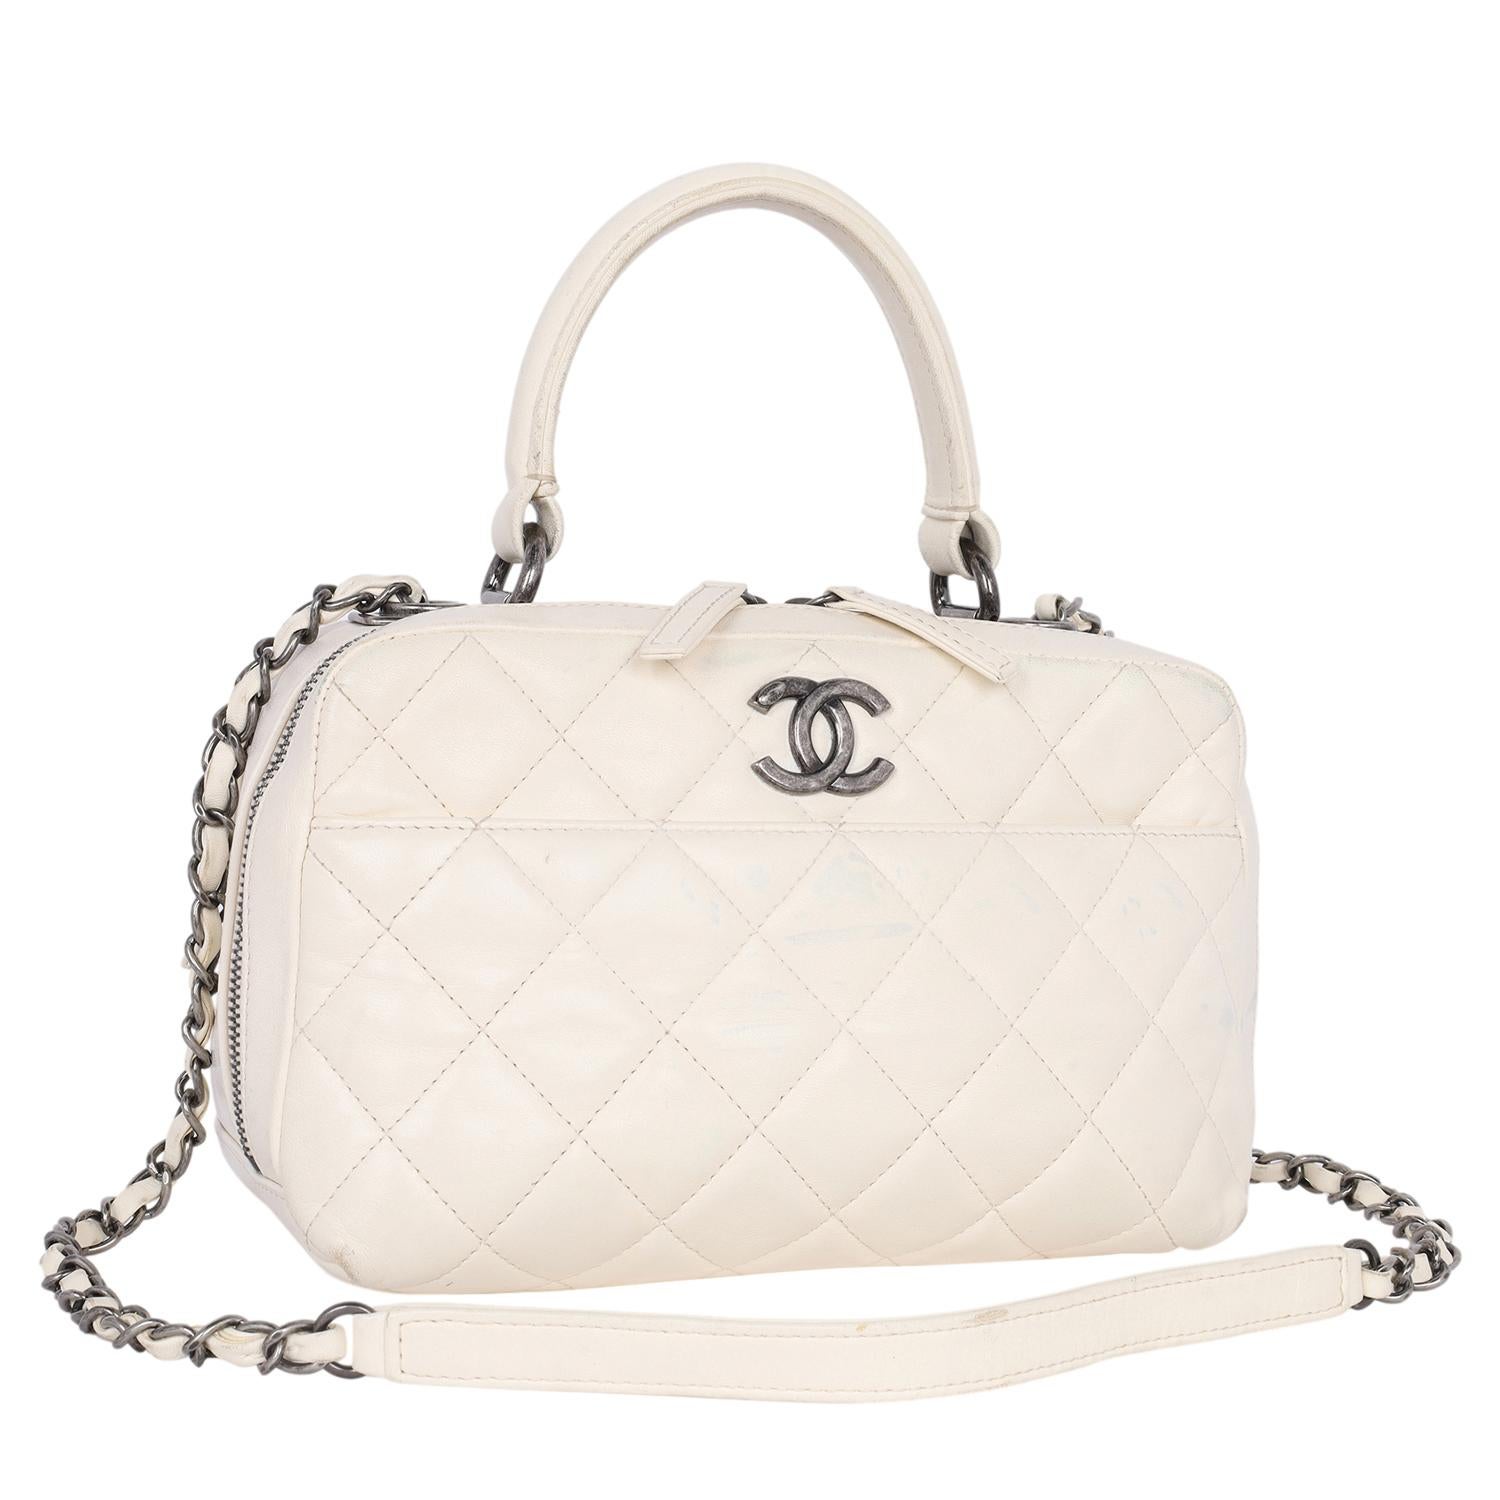 Chanel Lambskin Quilted Top Handle Vanity Case White In Good Condition For Sale In Salt Lake Cty, UT